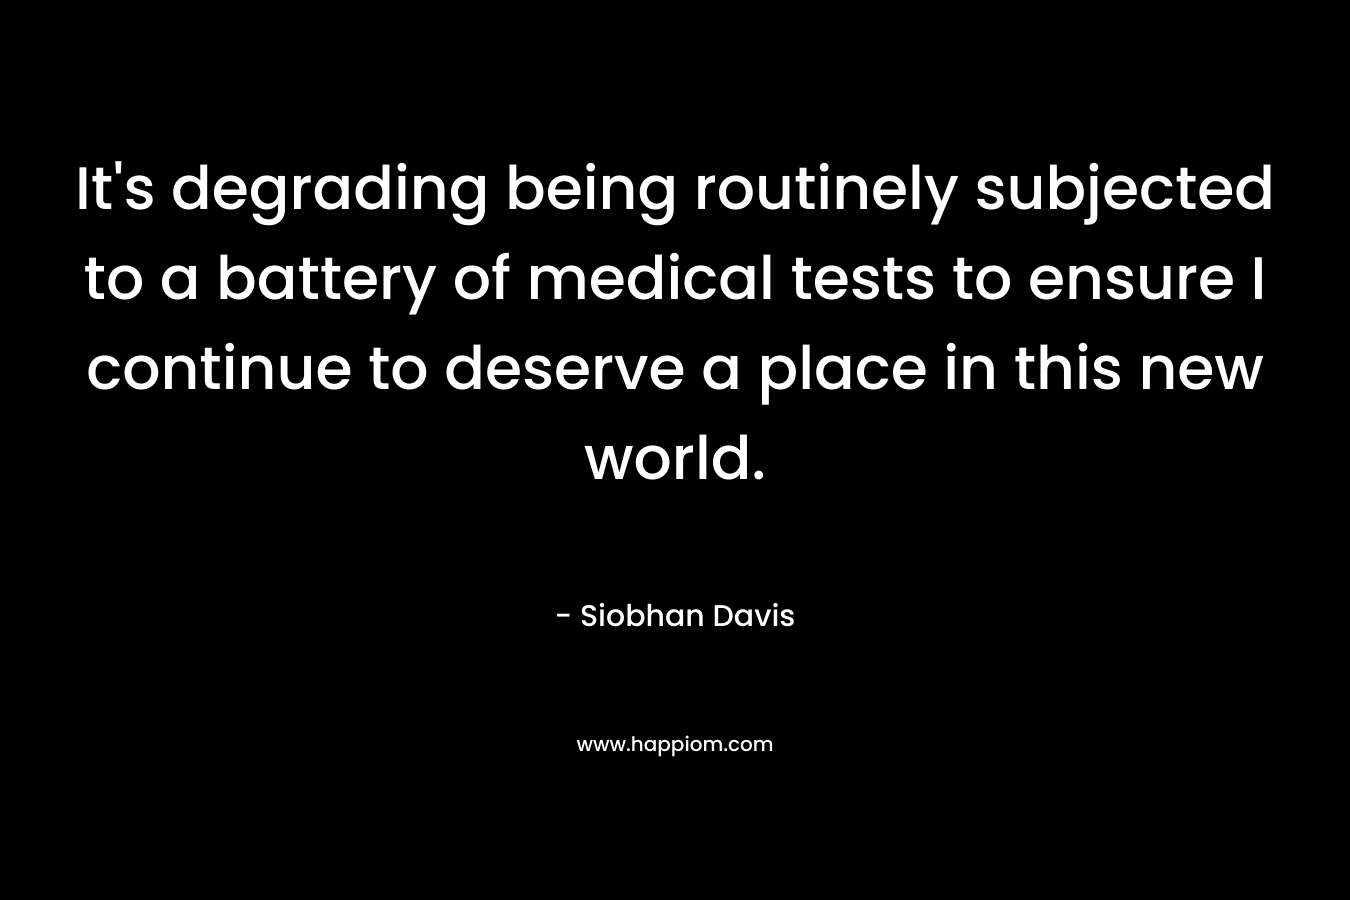 It’s degrading being routinely subjected to a battery of medical tests to ensure I continue to deserve a place in this new world. – Siobhan Davis